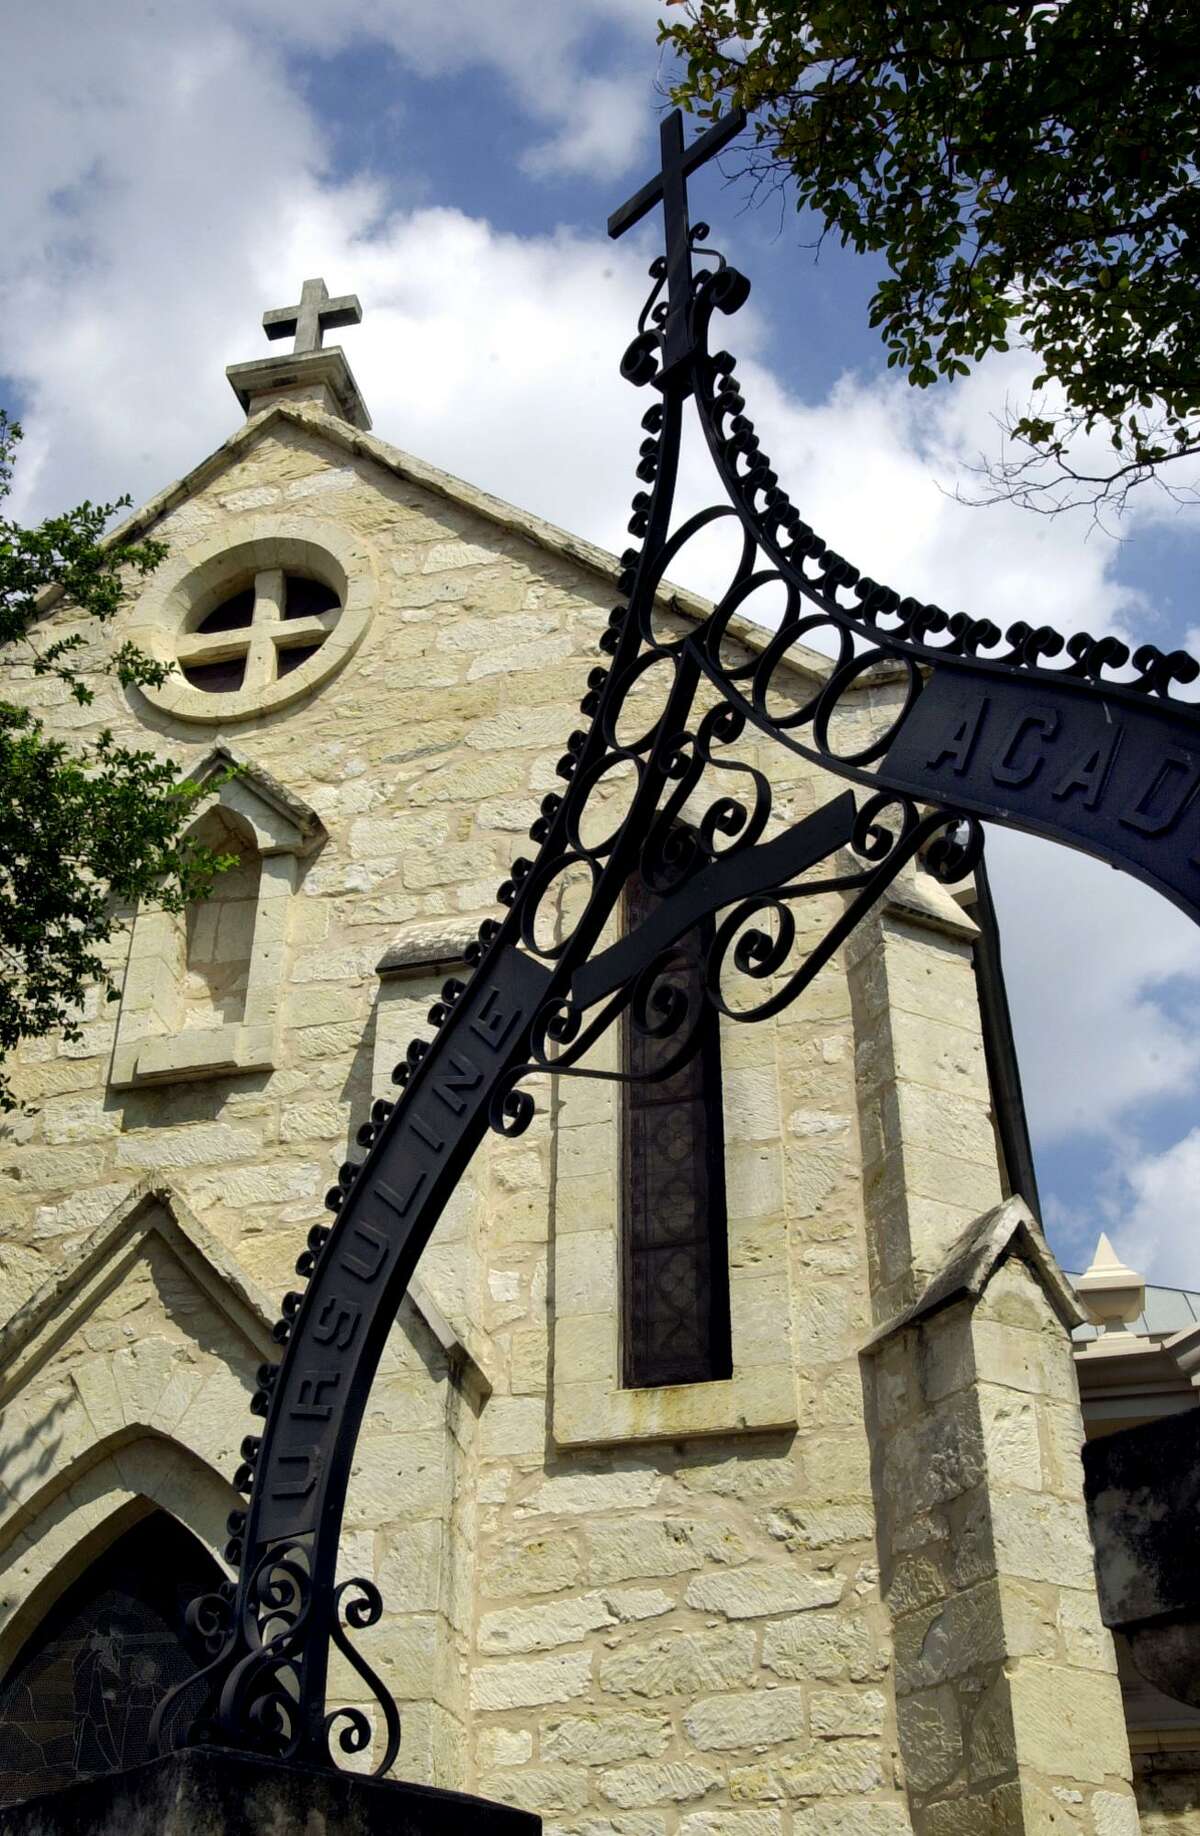 The Southwest School of Art occupies the former Ursuline Convent & Academy, founded in 1851 as San Antonio’s first school for girls.